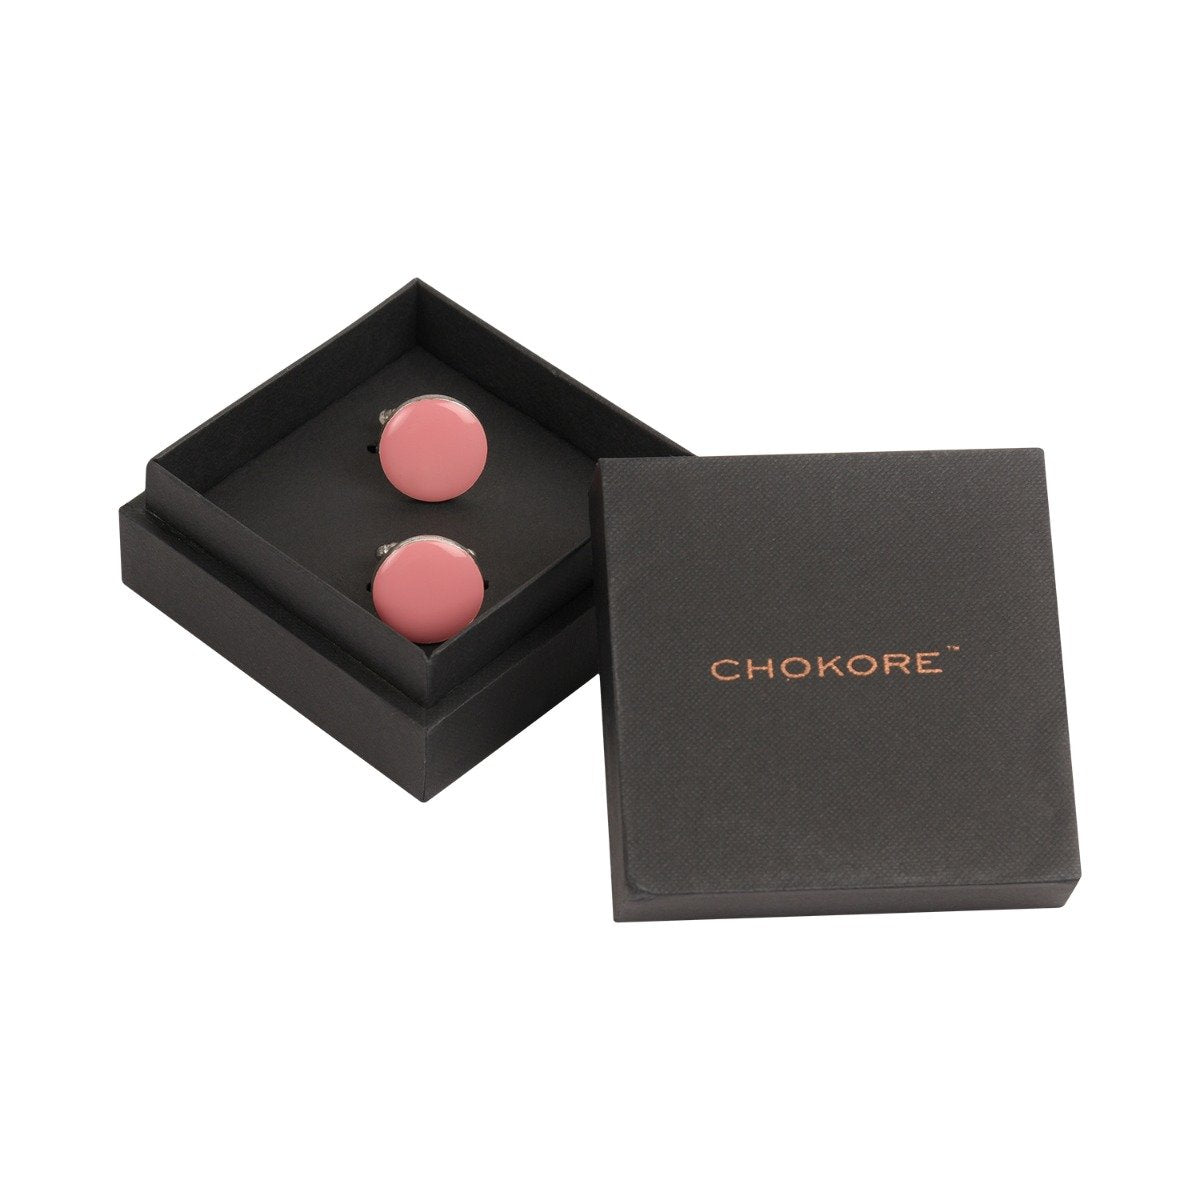 Chokore Old Rose Pink color Round shape Cufflinks